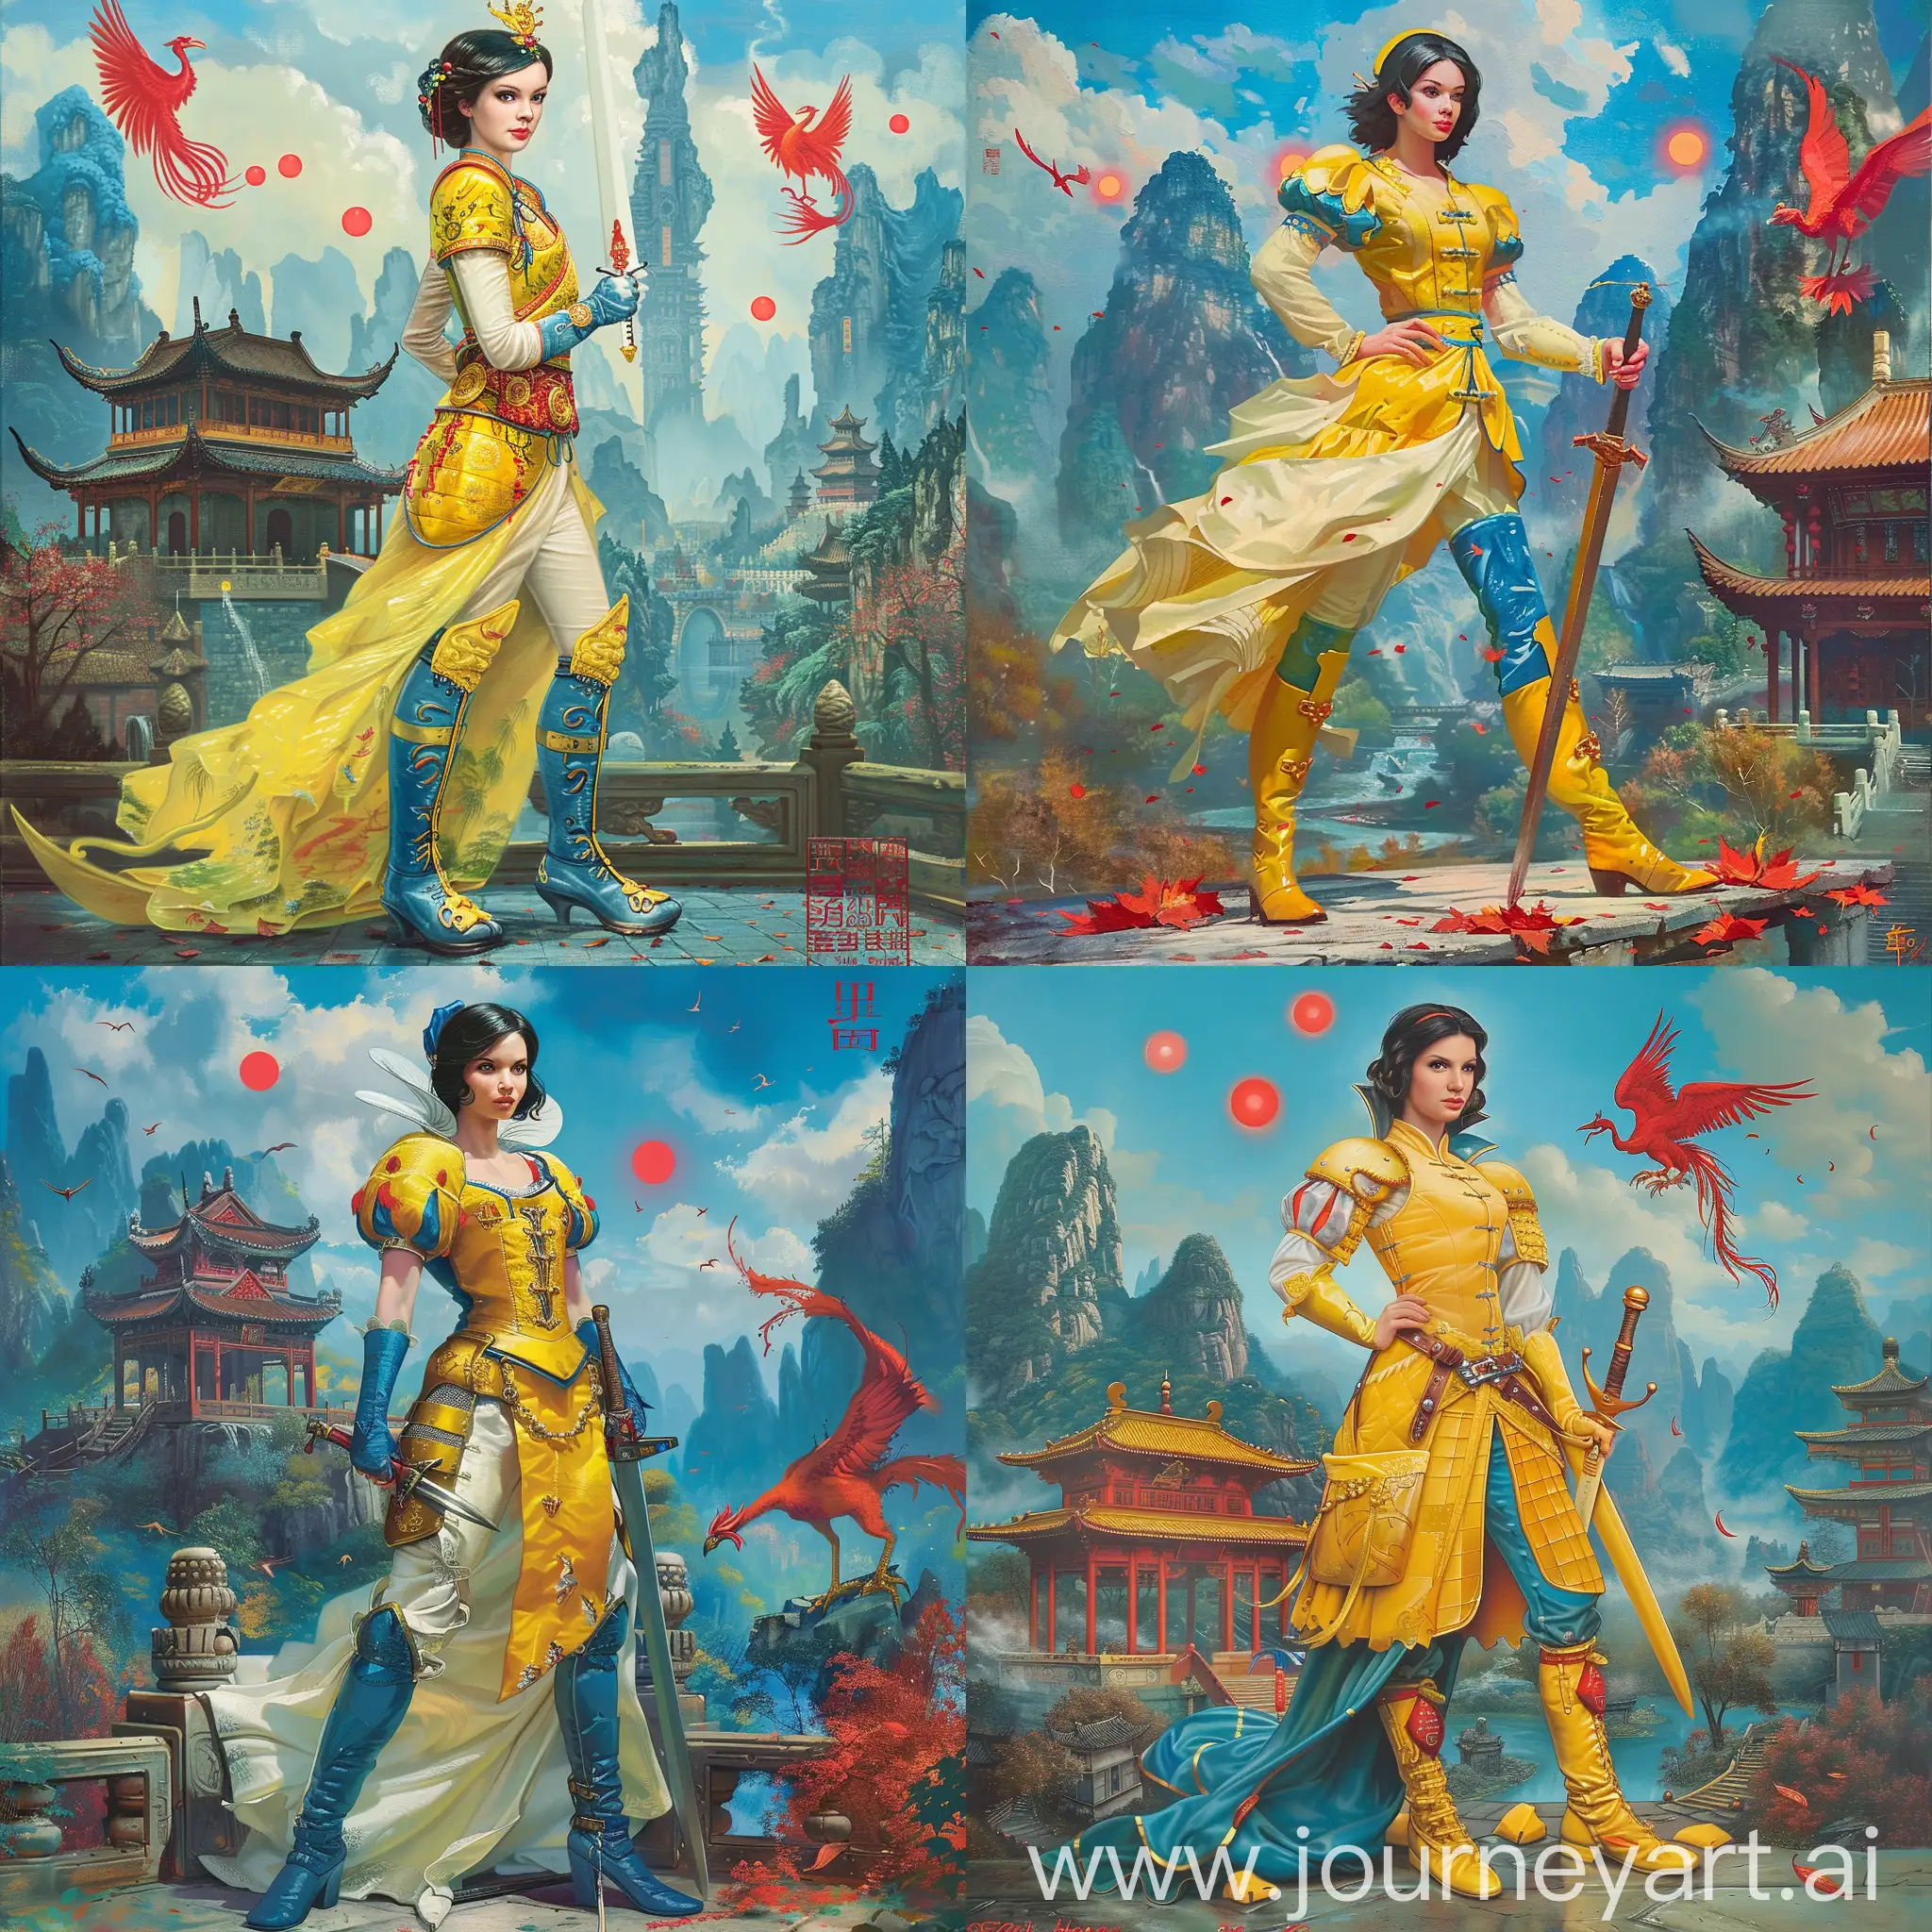 Historic painting style:

a Disney German Princess Snow White, she wears yellow and marine blue color style Chinese medieval armor and boot, she holds a Chinese sword in right hand, 

Chinese Guilin mountains and temple as background, red phoenix and three small red suns in blue sky.